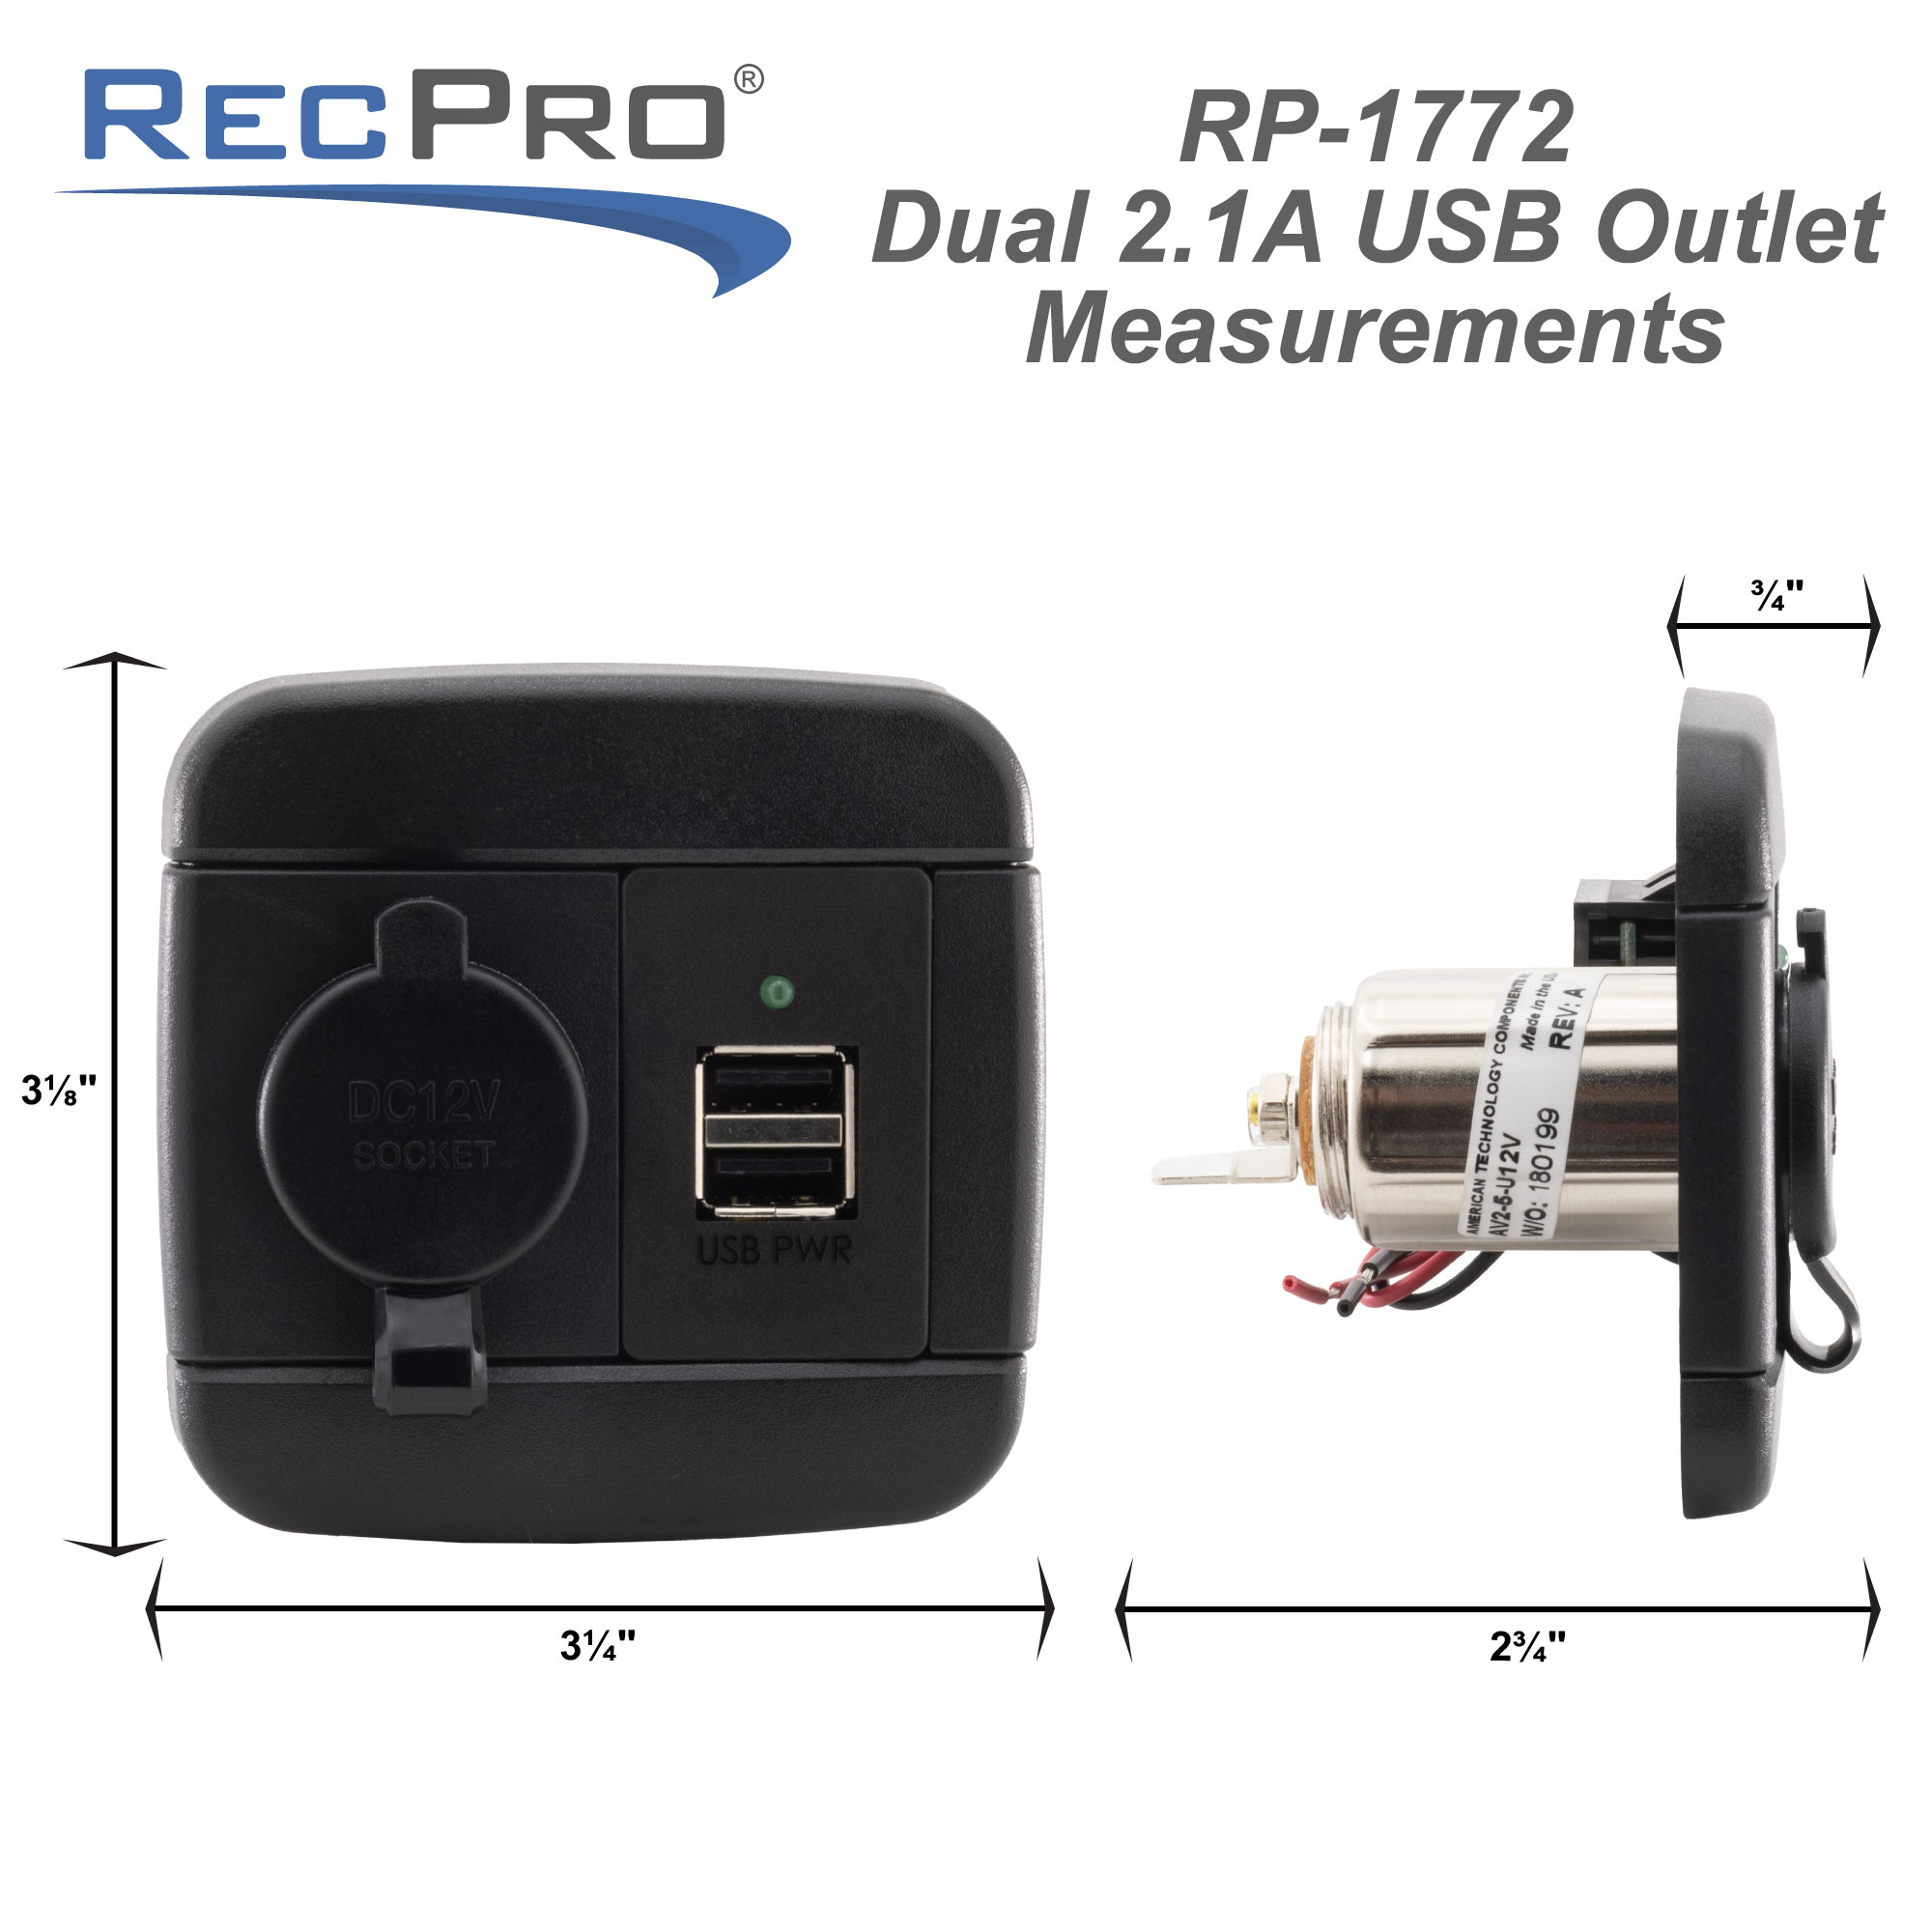 RV Cigarette Lighter Socket with Dual USB Ports - RecPro